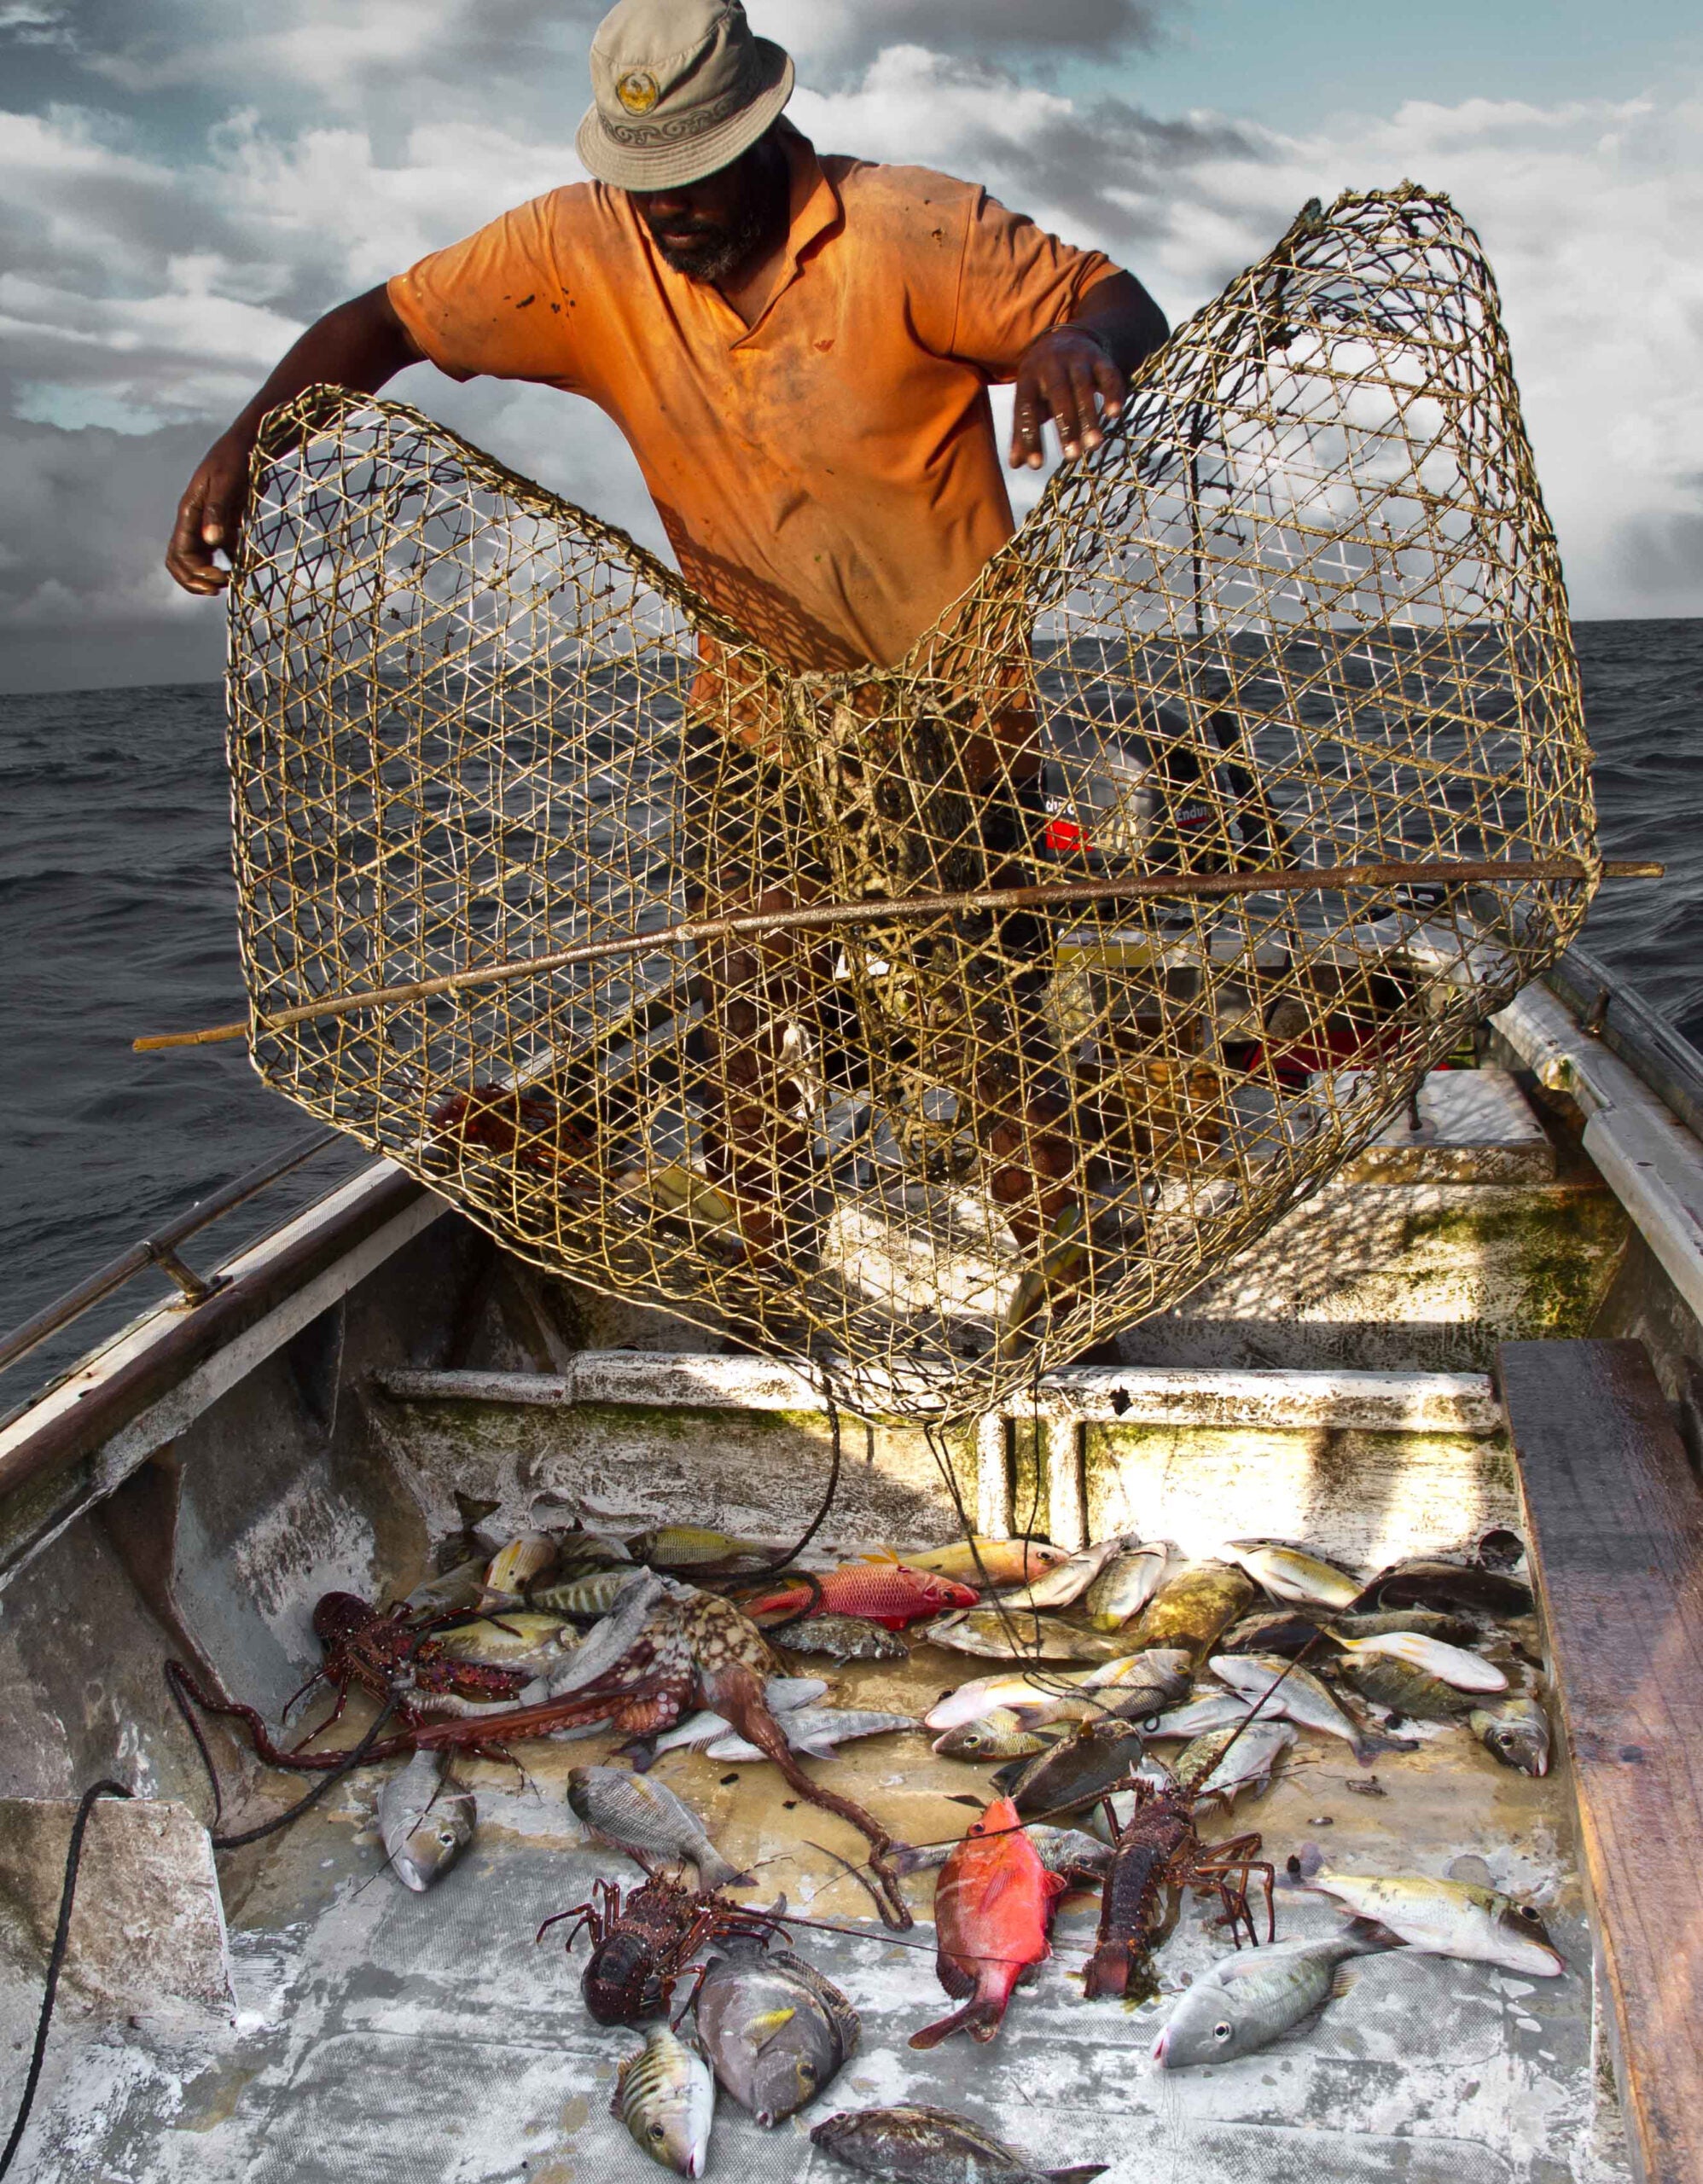 An artisanal fisherman in the Seychelles pulls in his catch